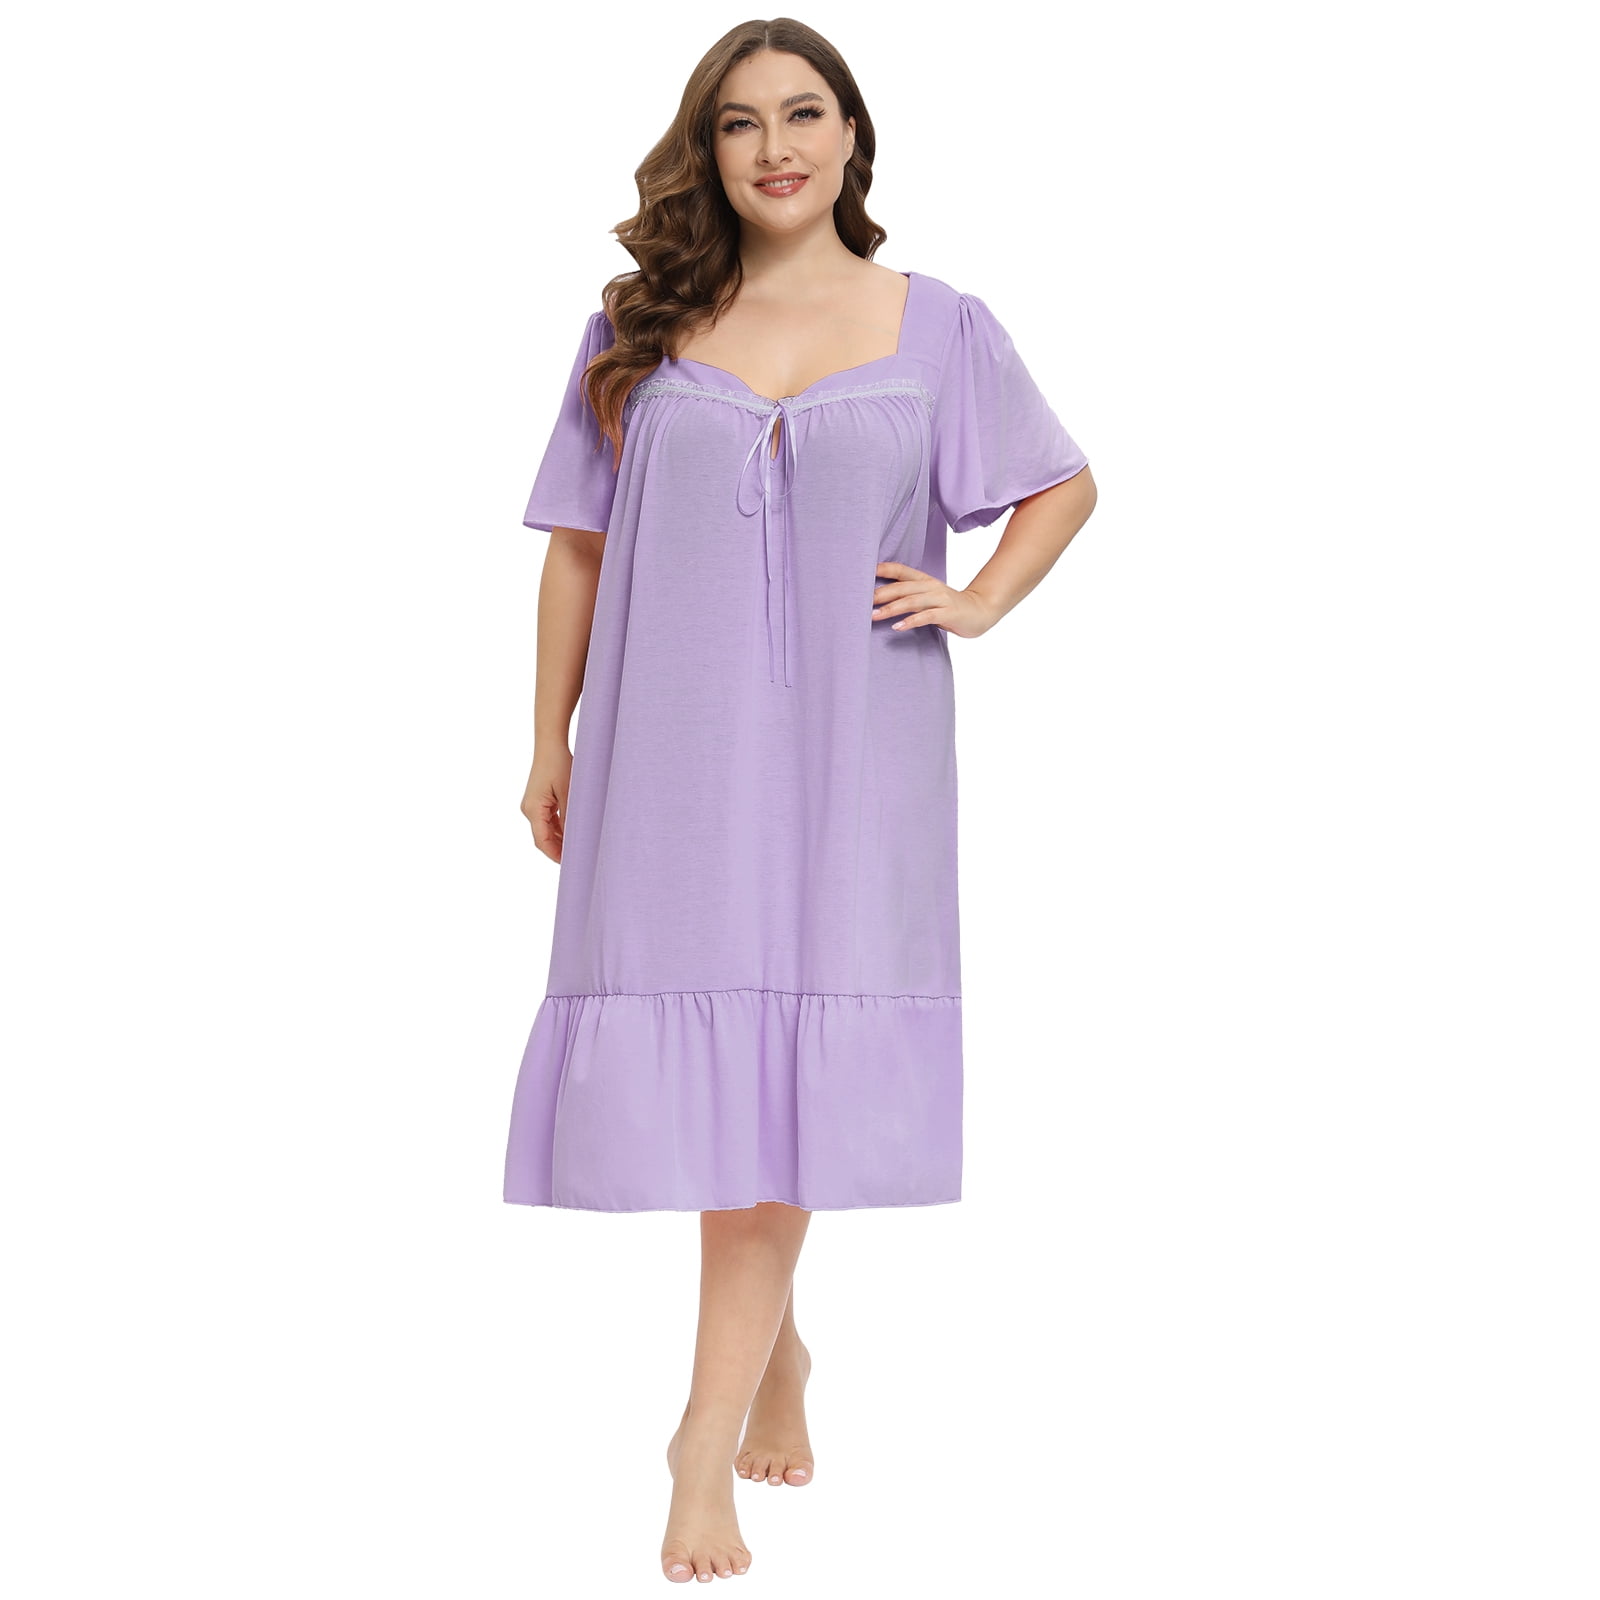 Xmarks Plus Size Night Gowns for Ladies - Summer Nightgowns for Women ...